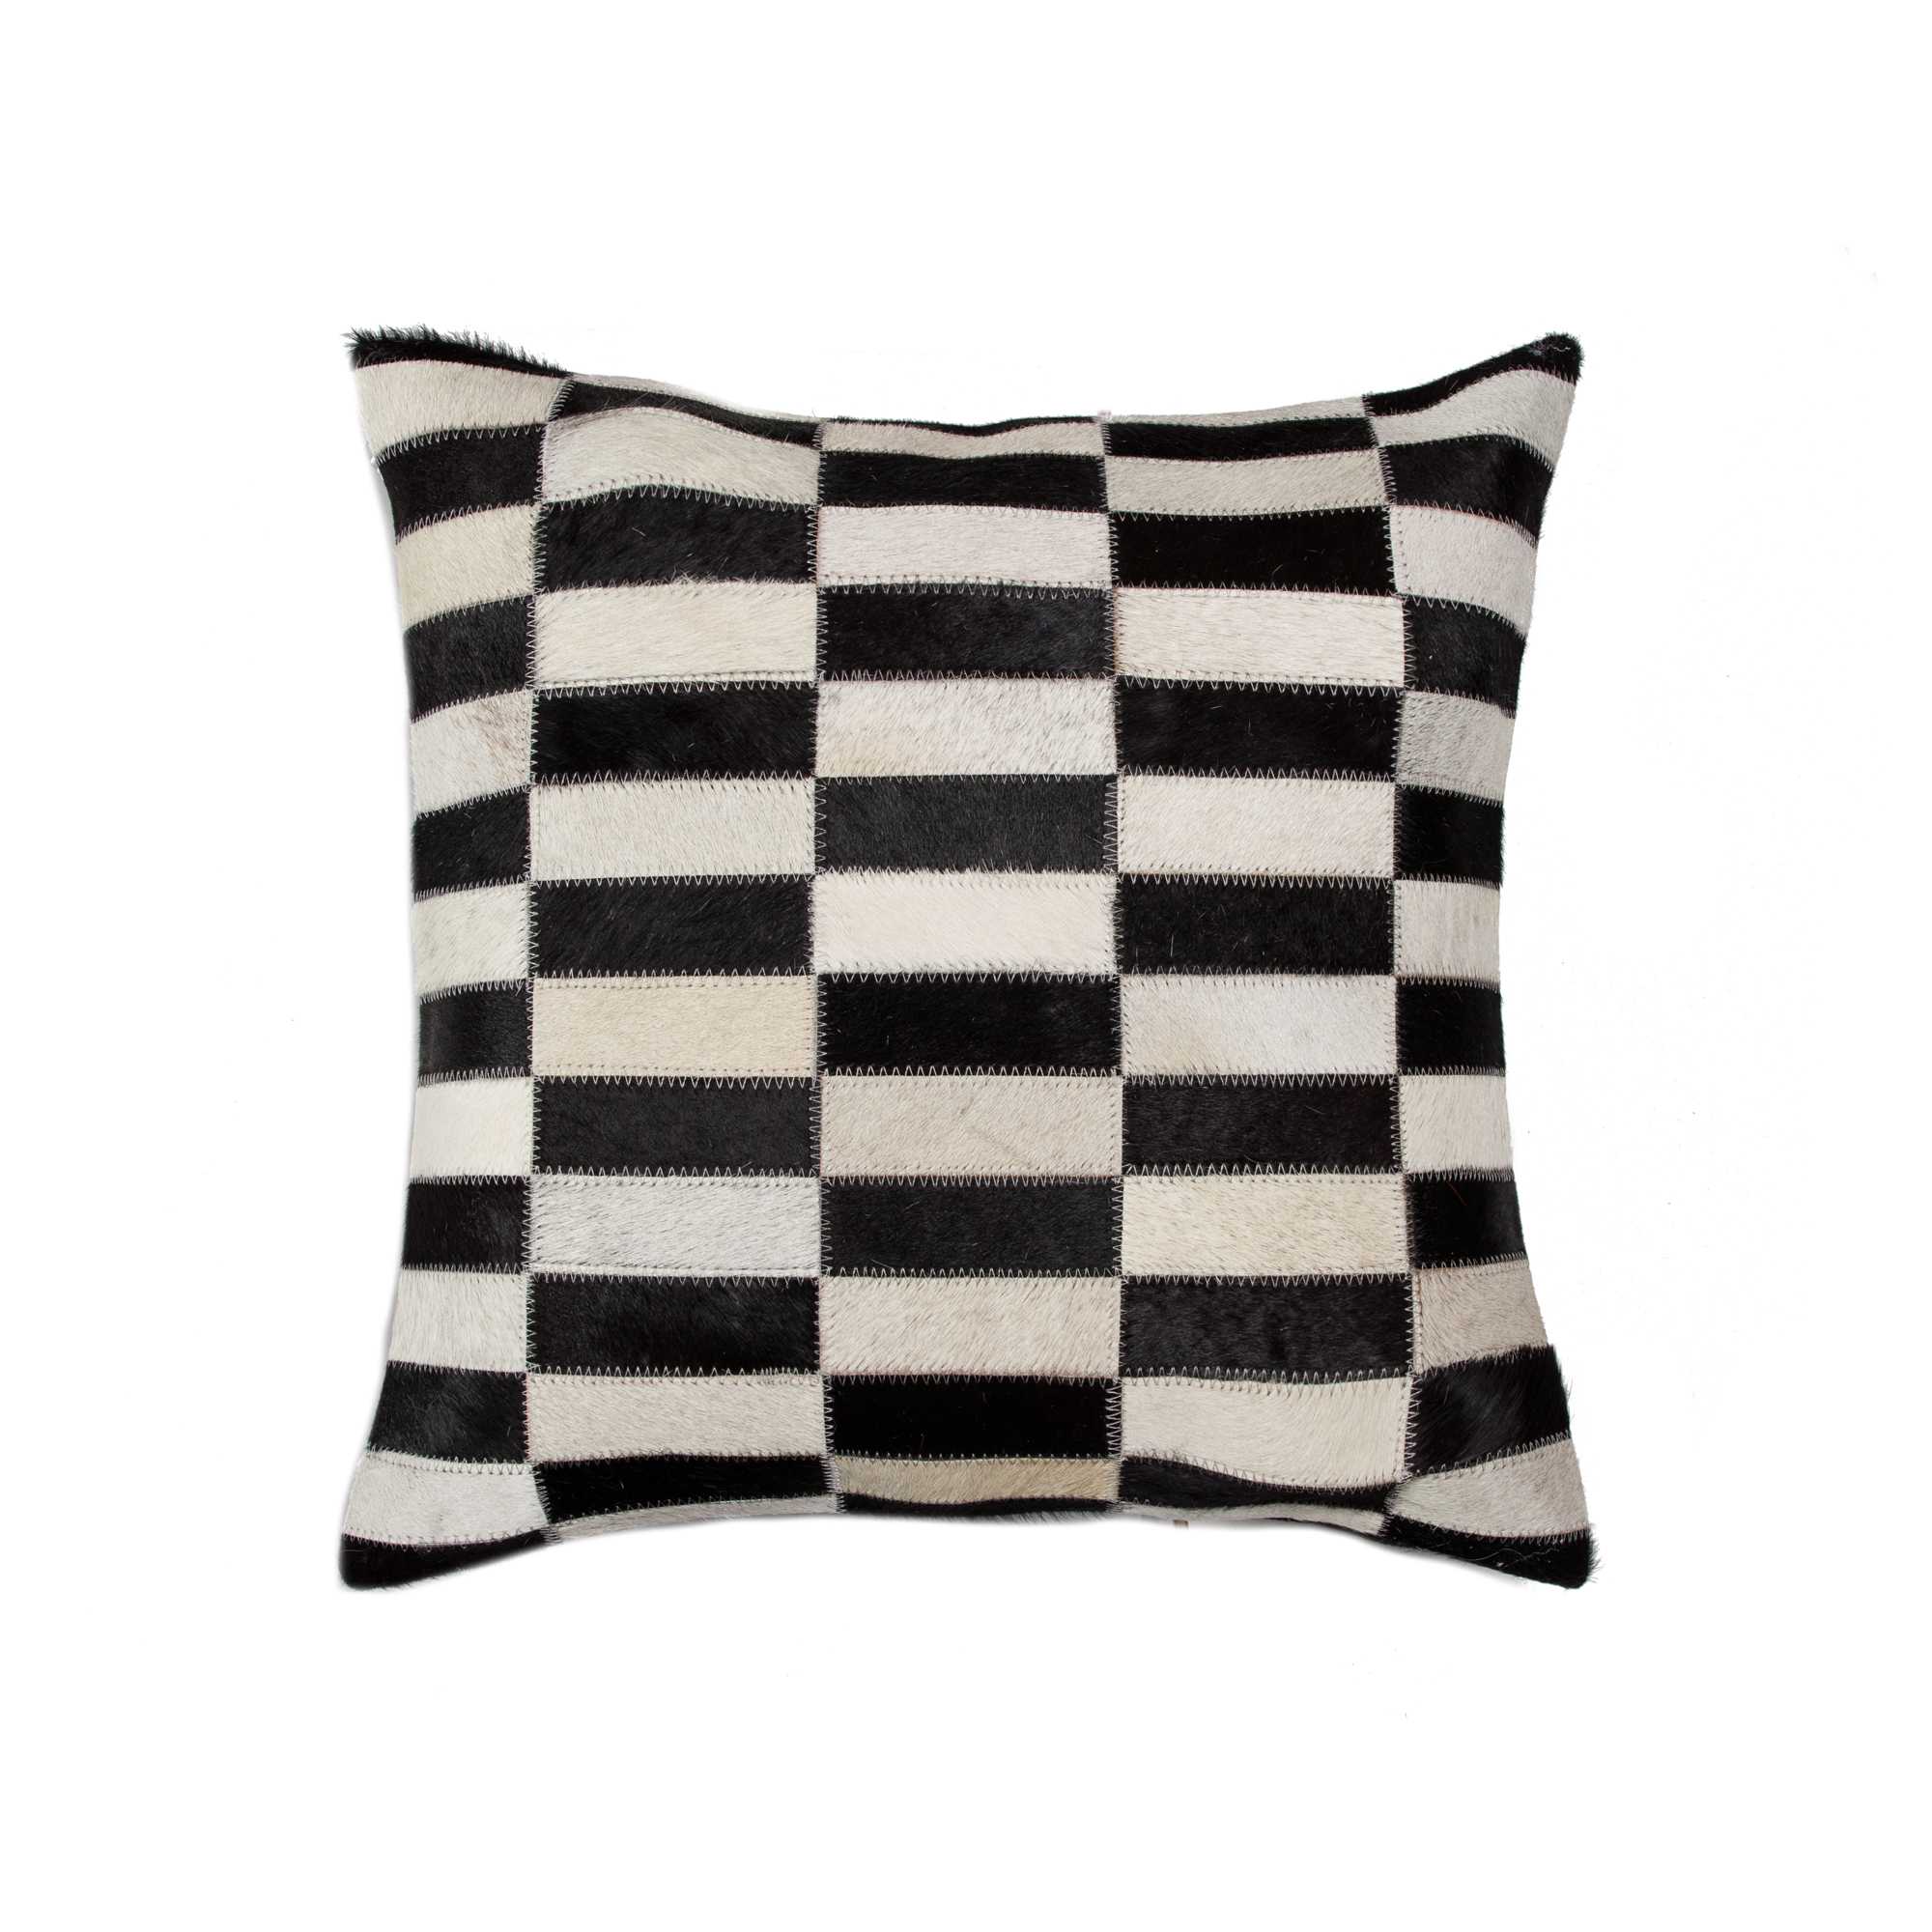 18" x 18" x 5" Black And White Linear Cowhide - Pillow